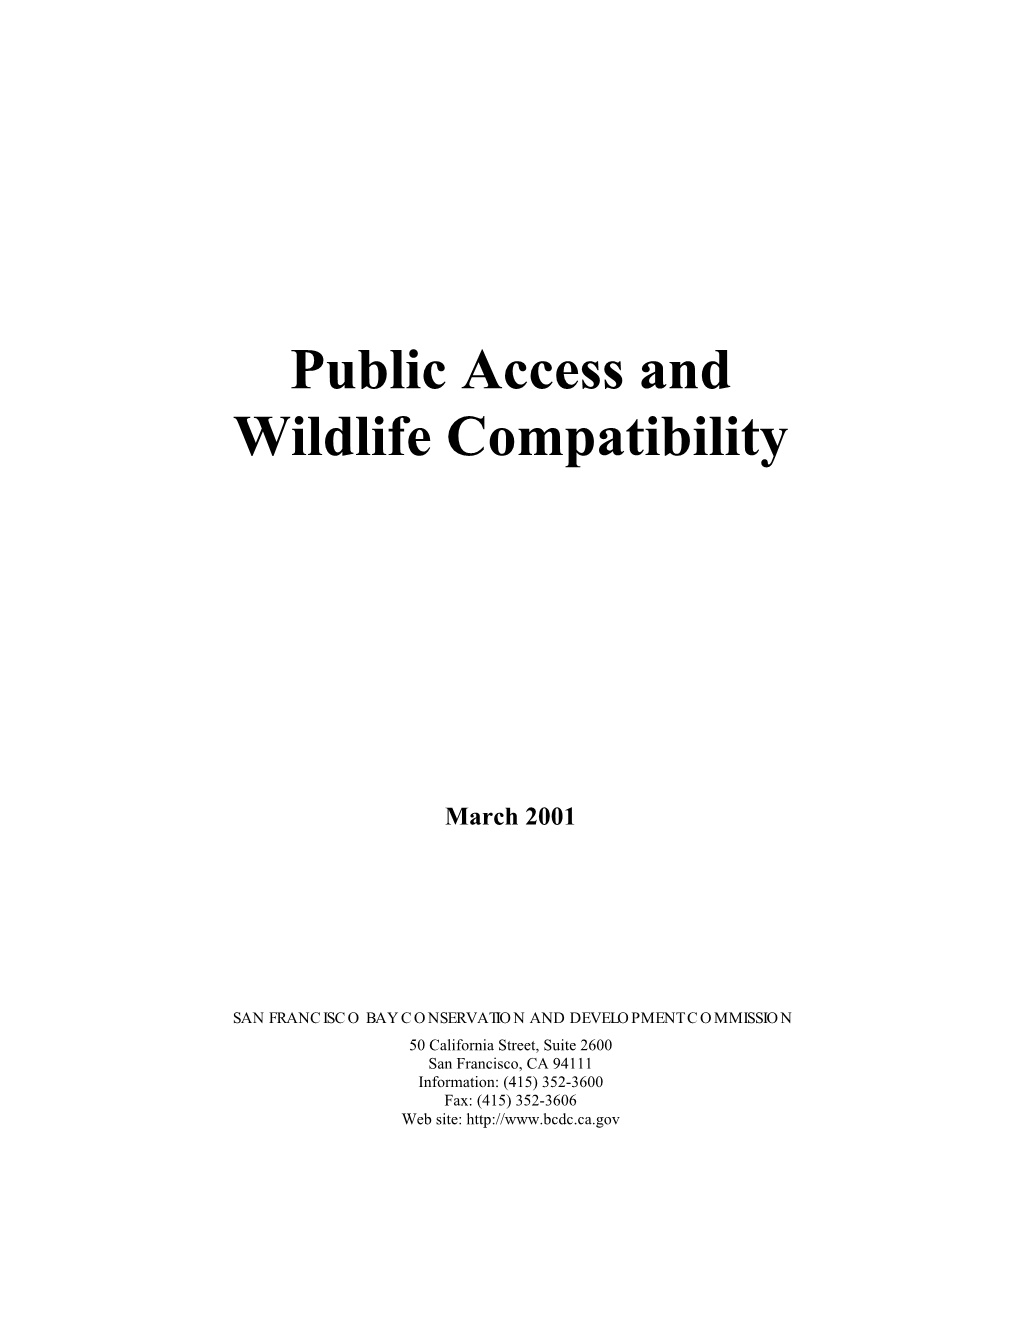 Public Access and Wildlife Compatibility